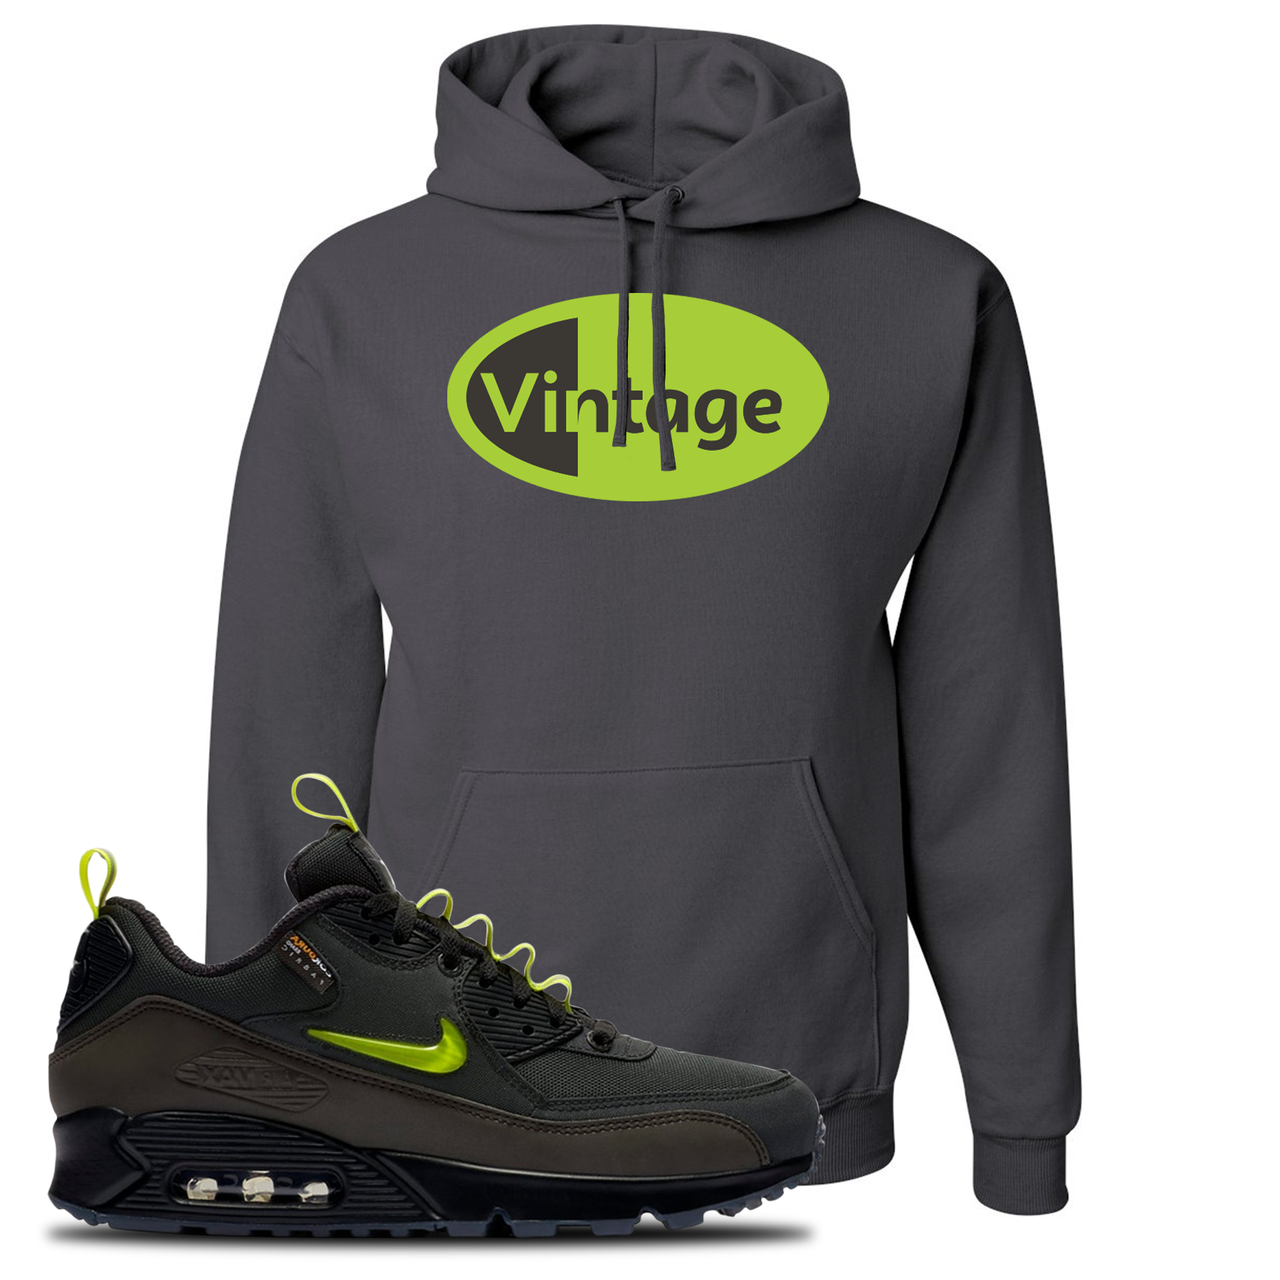 The Basement X Air Max 90 Manchester Vintage Oval Charcoal Gray Sneaker Hook Up Pullover Hoodie